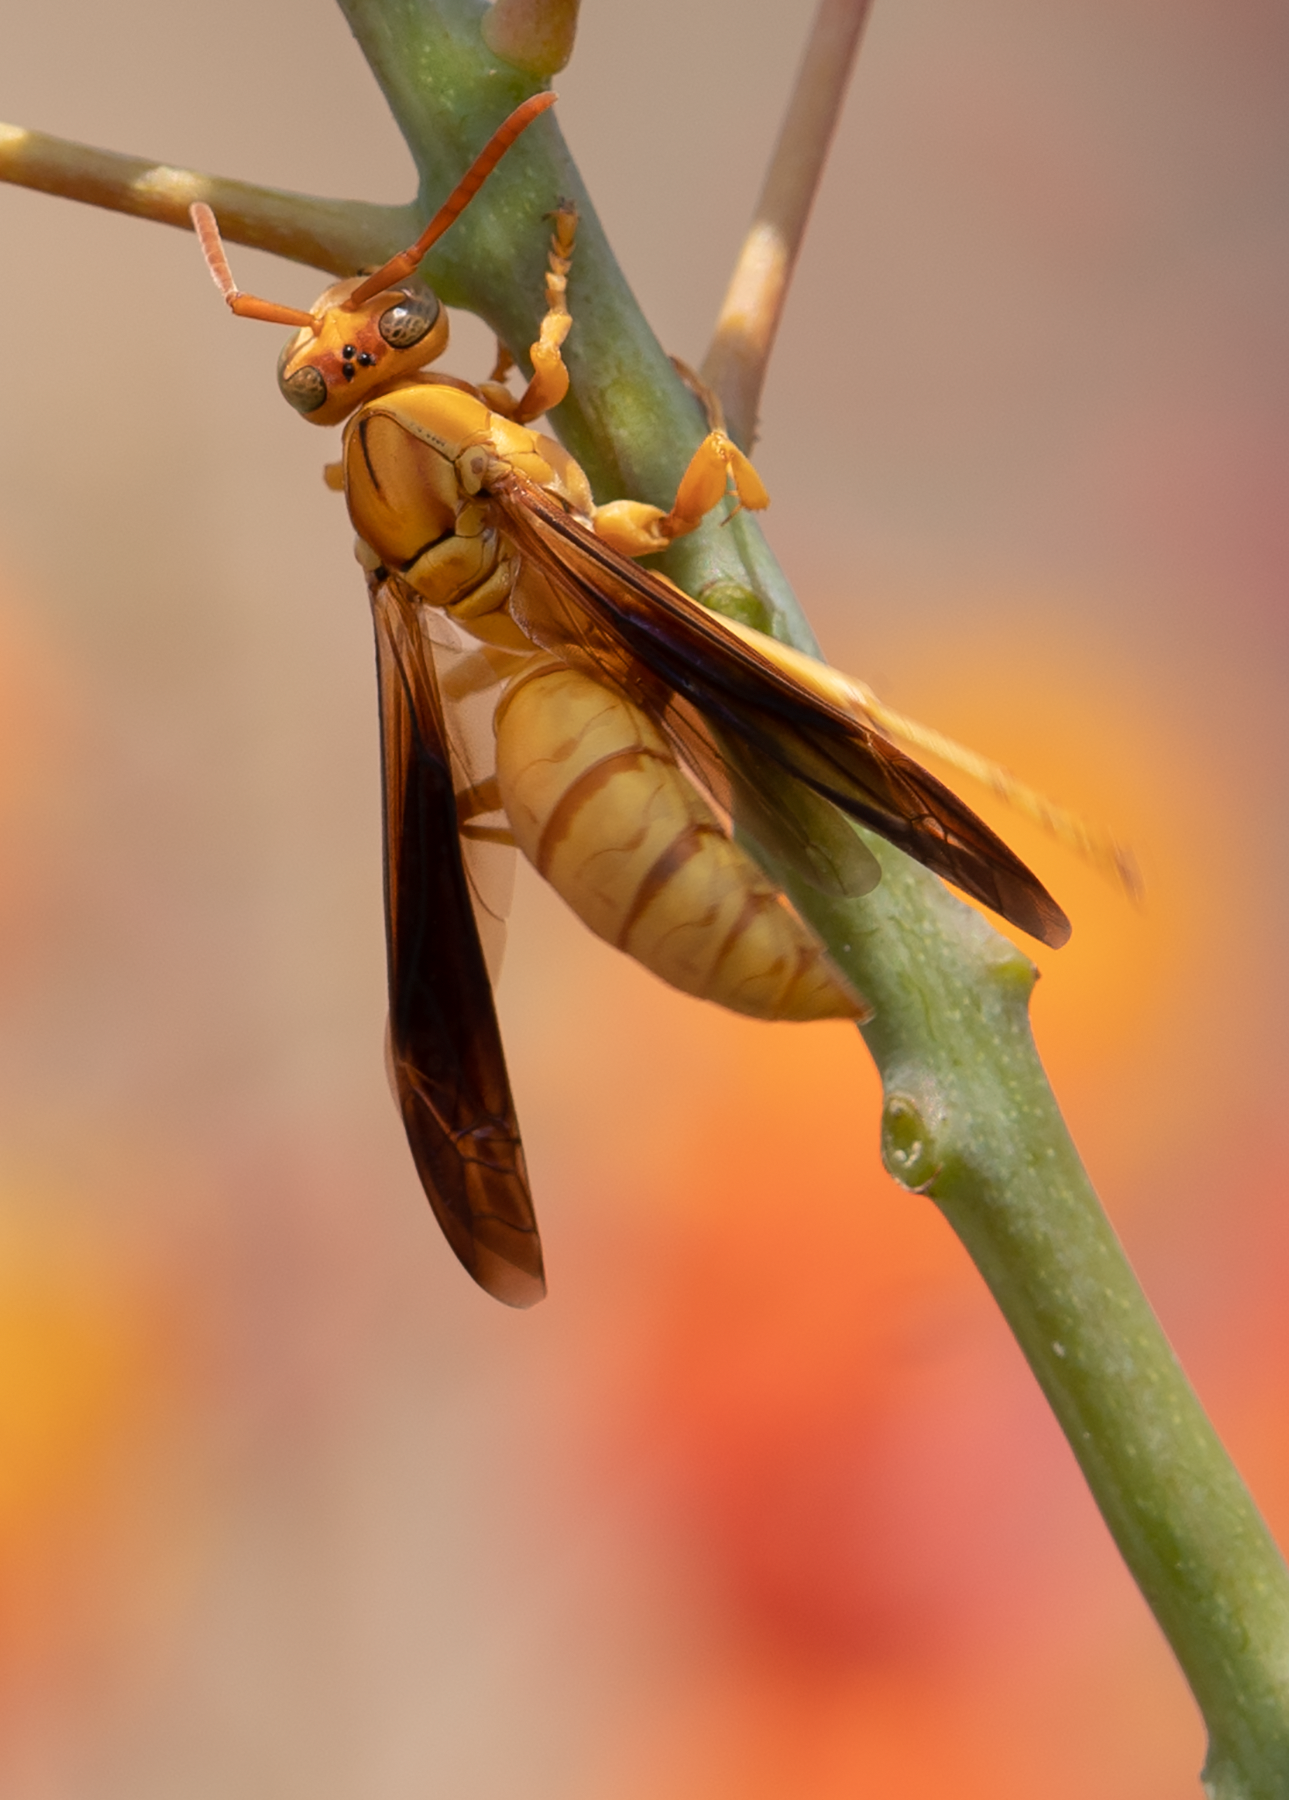 Golden Paper Wasp (male Polistes flavus), Red Bird of Paradise SP-W